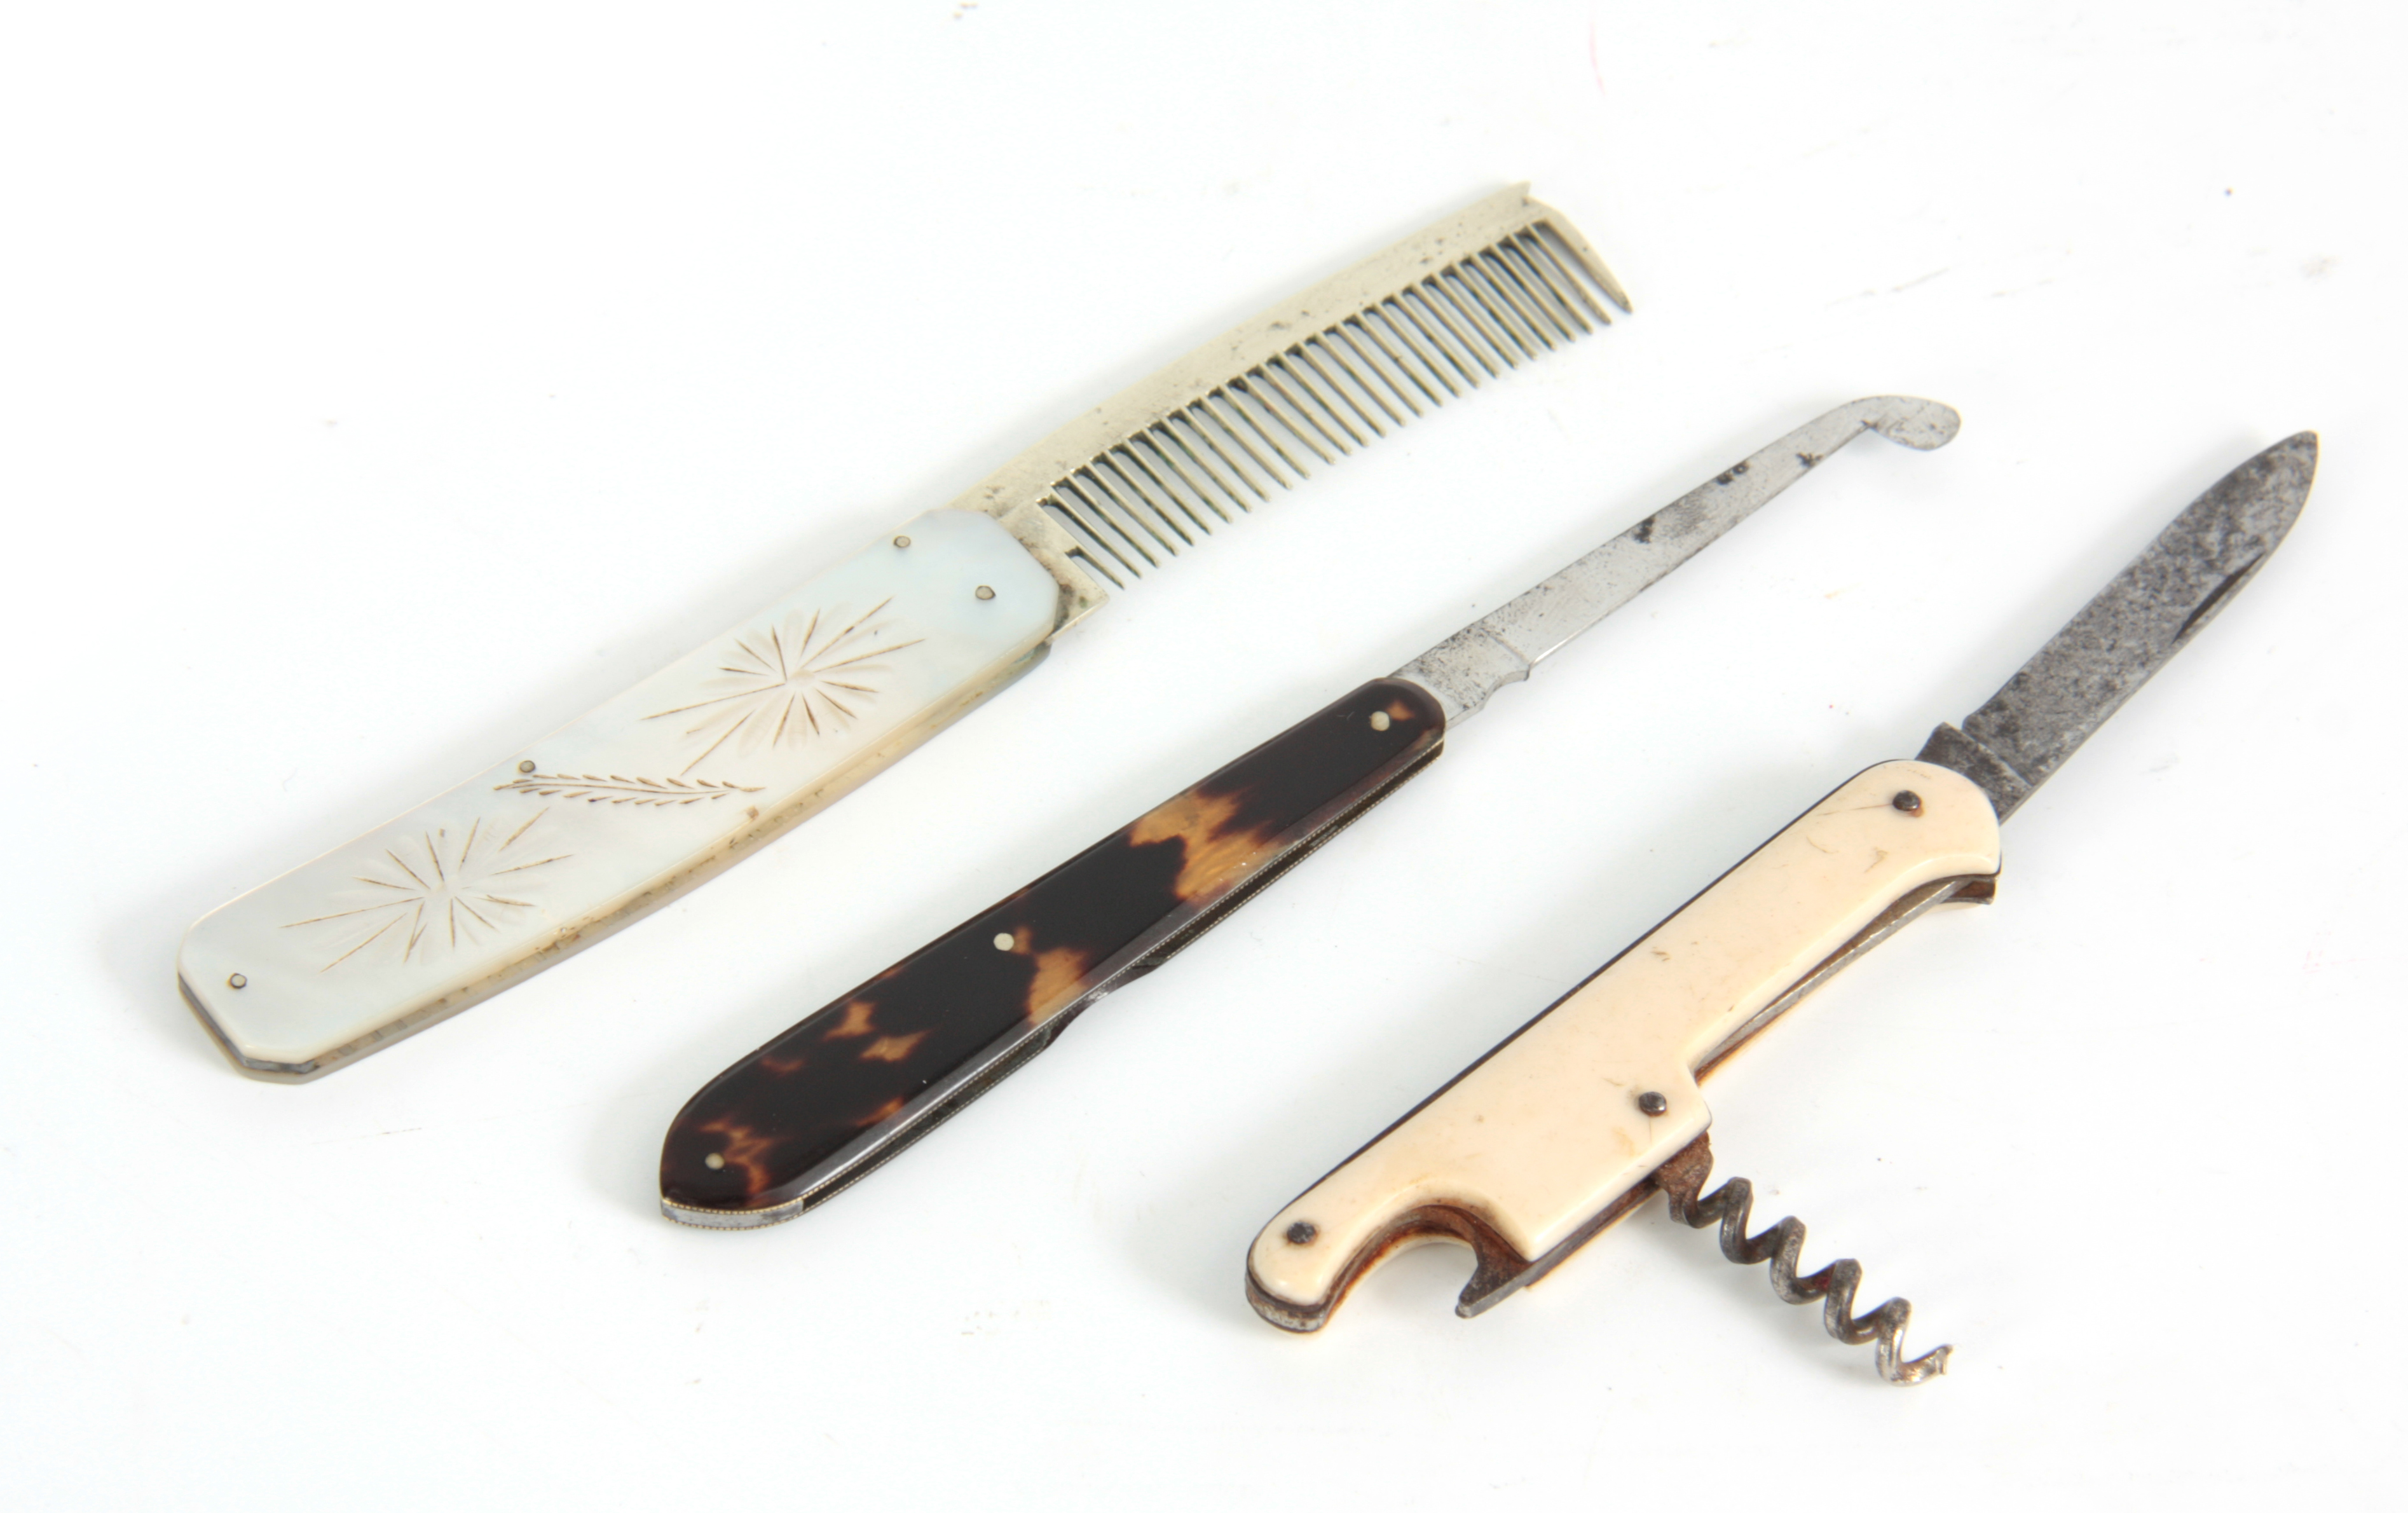 A 19TH CENTURY COMB with engraved mother of pearl handle and silver comb, TOGETHER WITH A SURGEONS